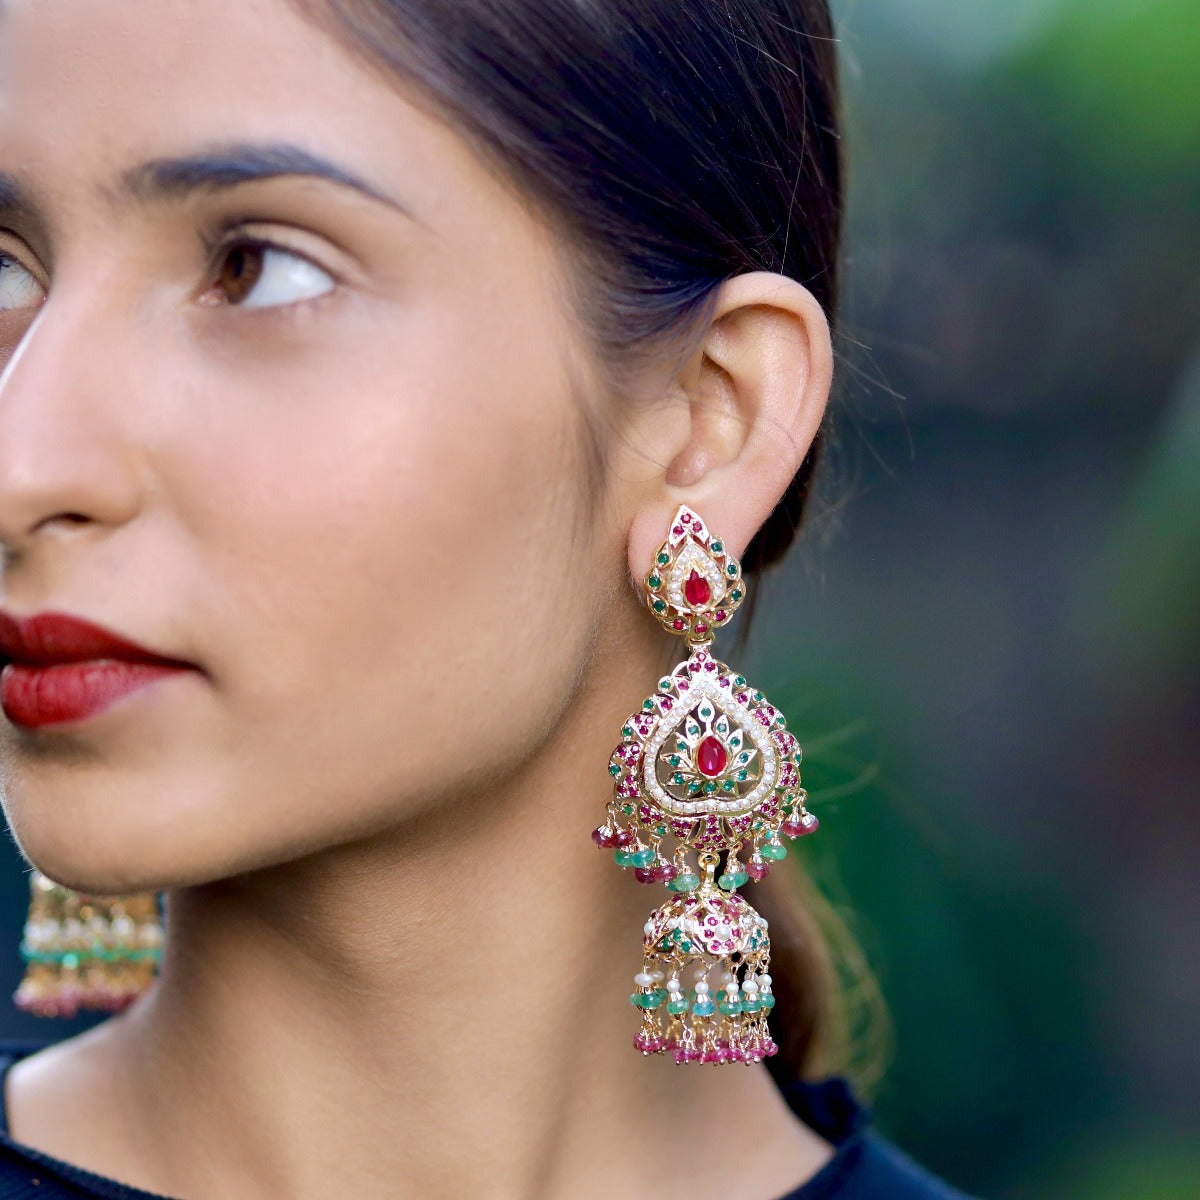 large earrings with jhumka at bottom